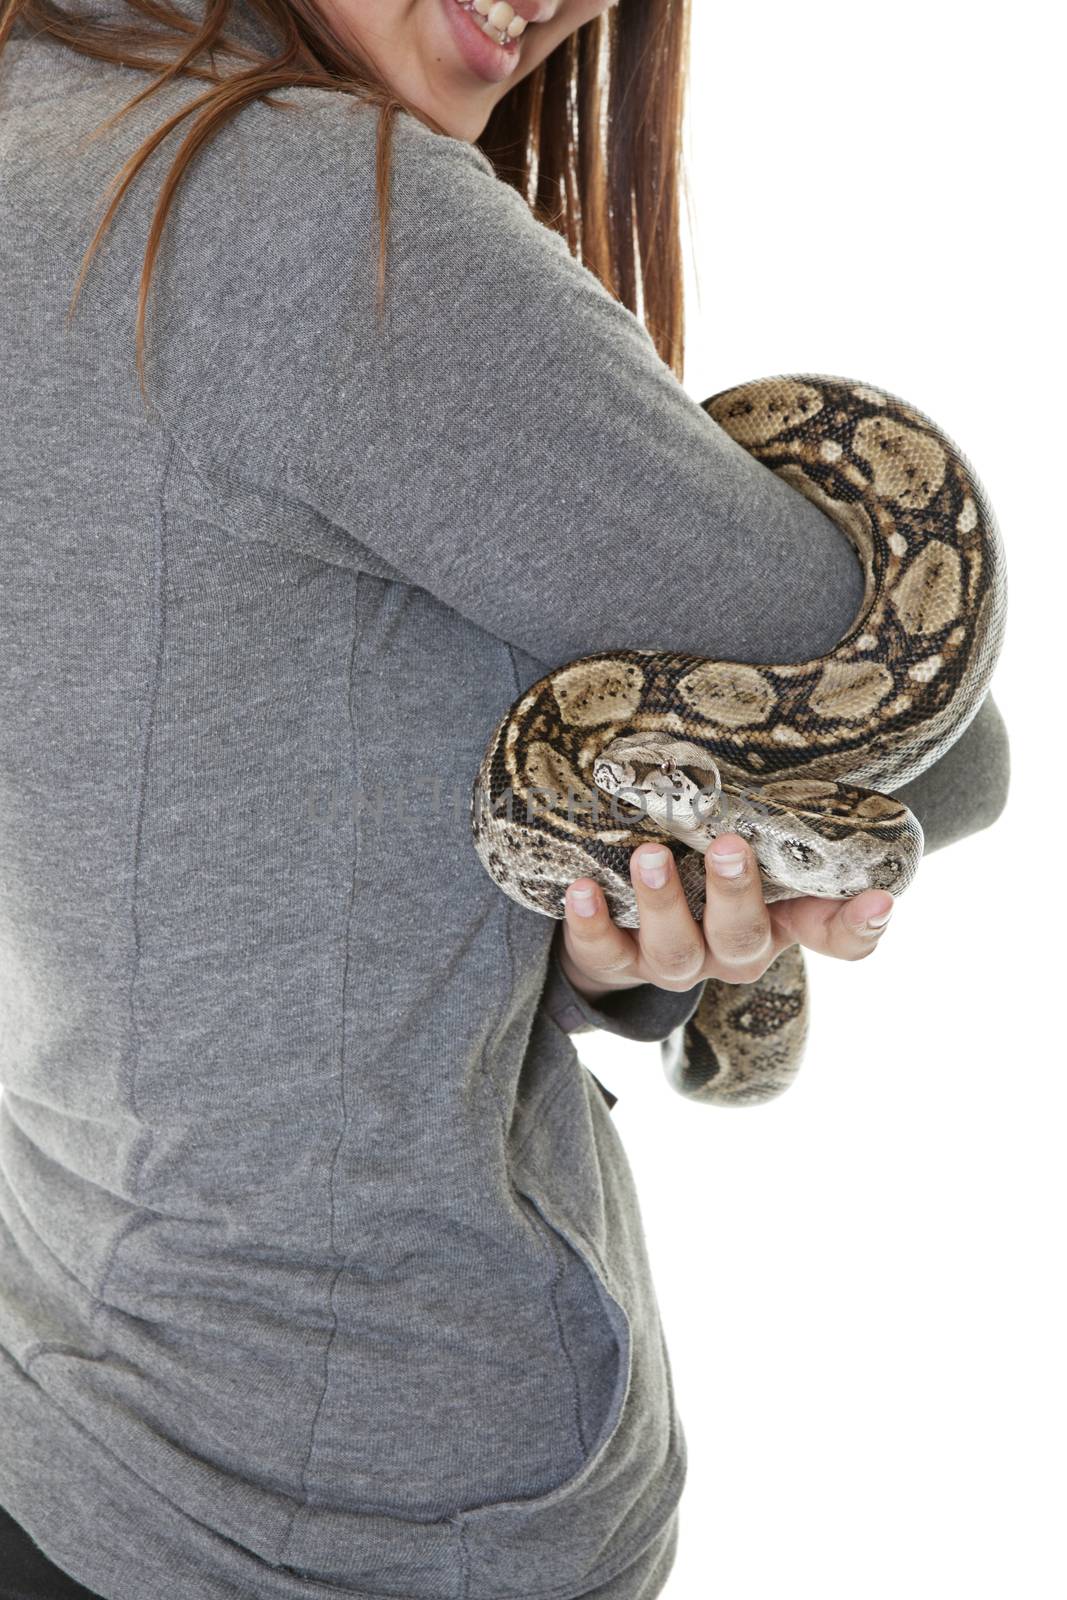 A curious pet boa snake held by a smiling young woman.  Shot on white background.